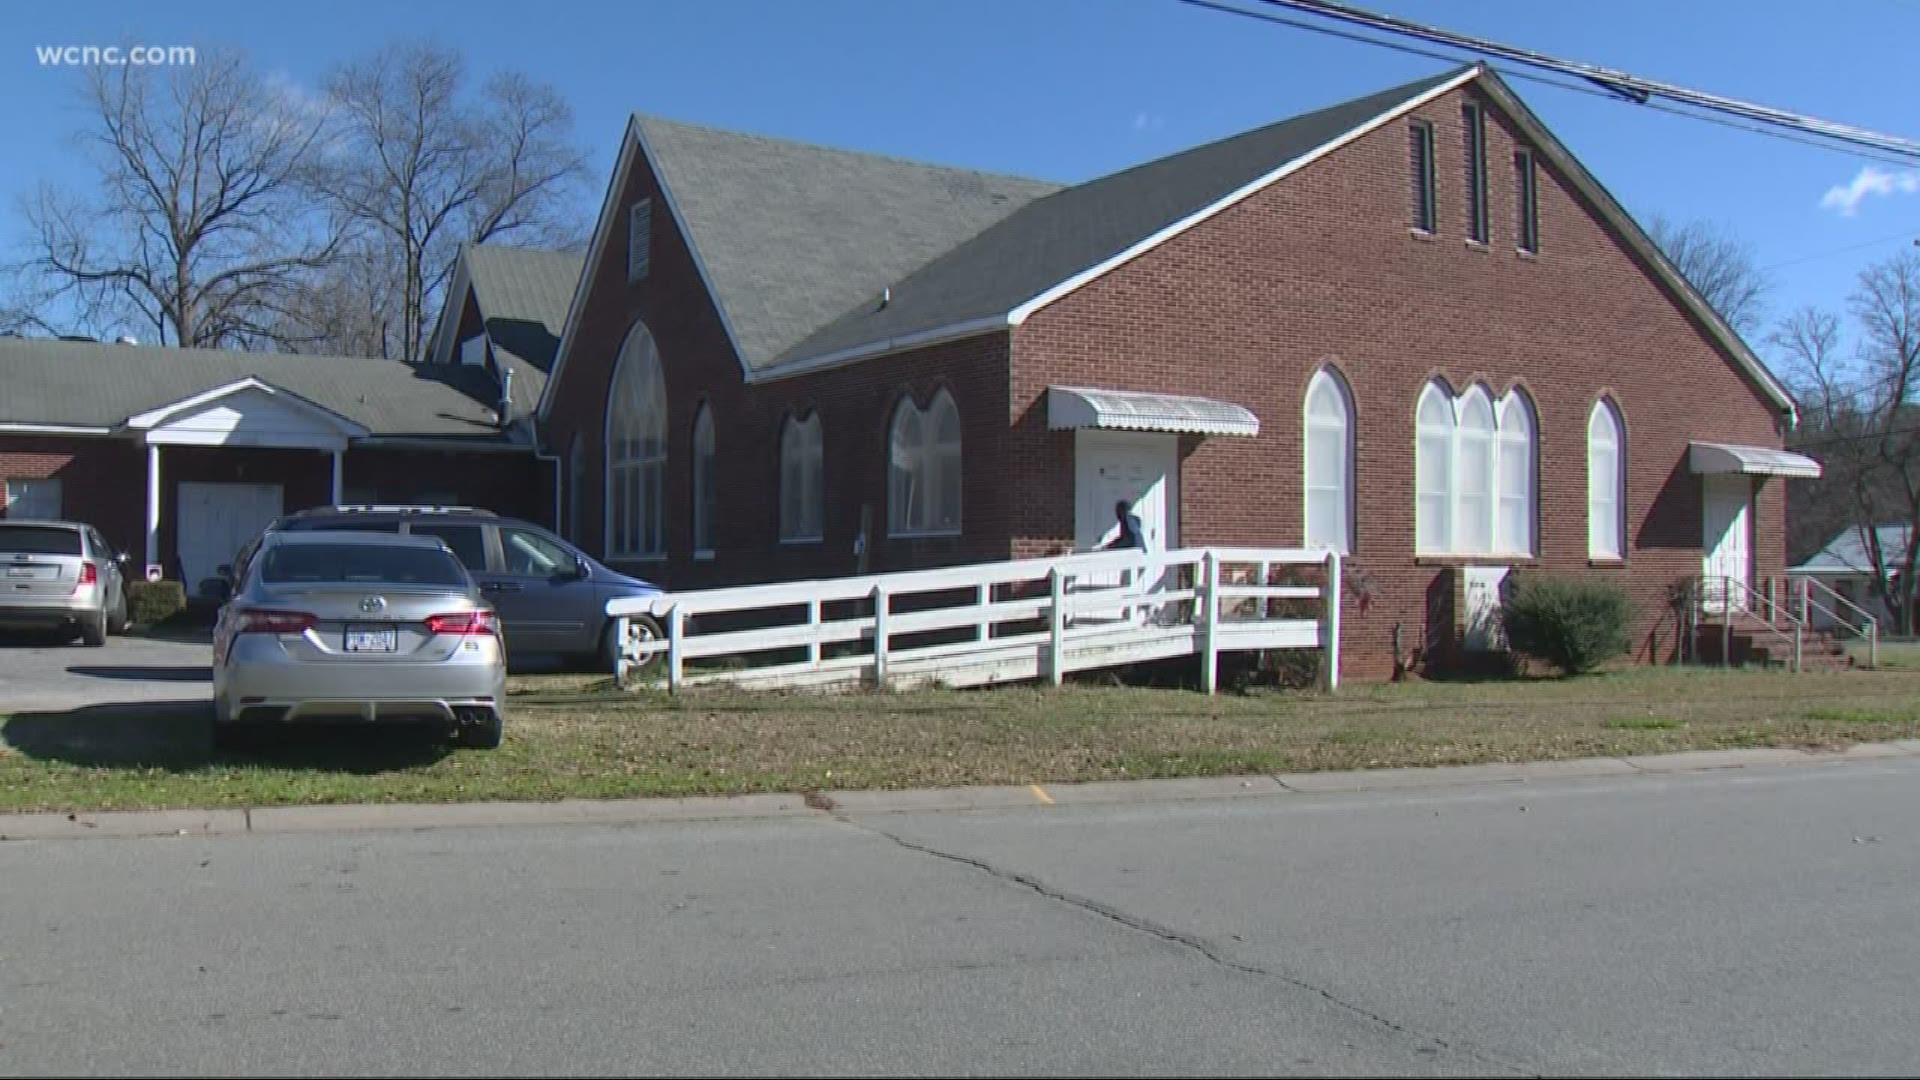 New Outreach Christian Center started a GoFundMe page for families in need. Organizers say the program has been helping people for a while, but right now they want to help those who won't be paid until the government reopens.